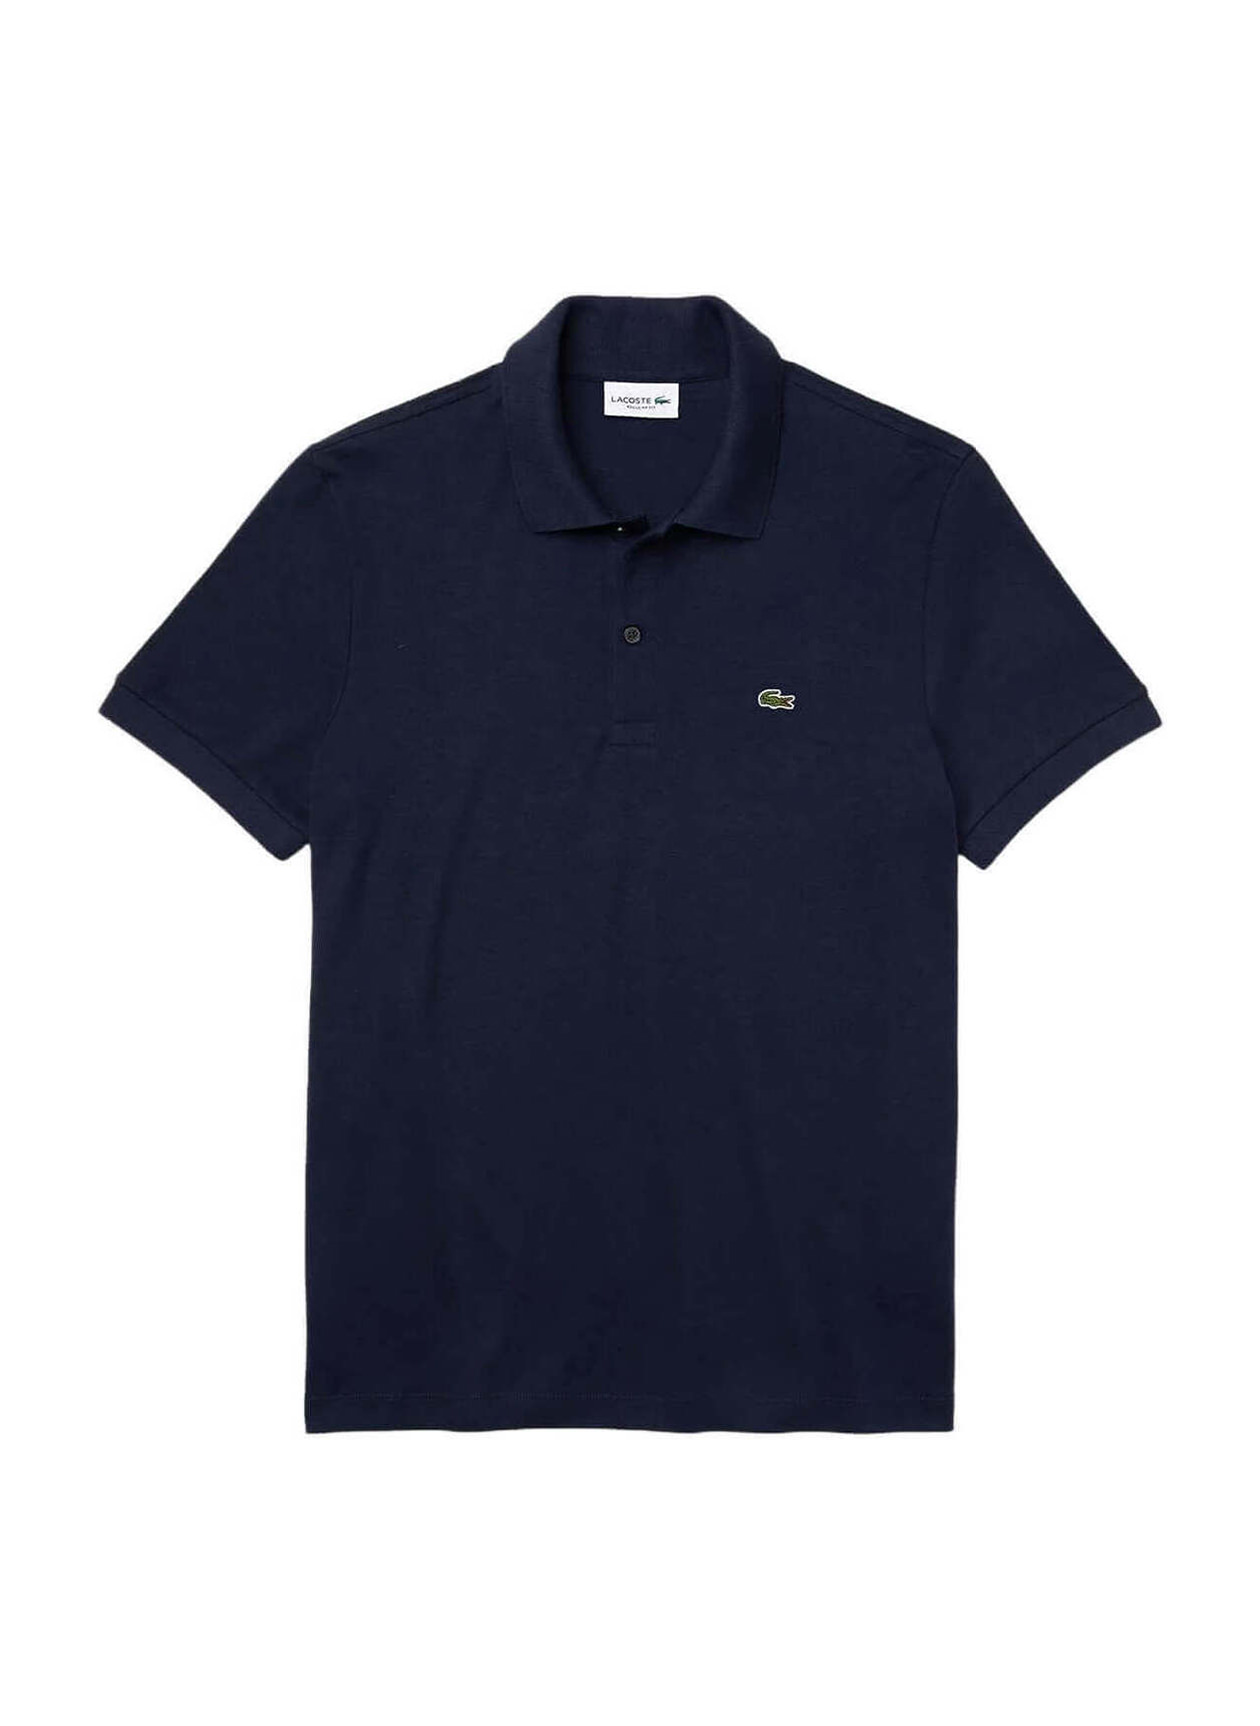 Lacoste Men's Navy Blue Regular Fit Soft Cotton Polo | Customized Polo ...